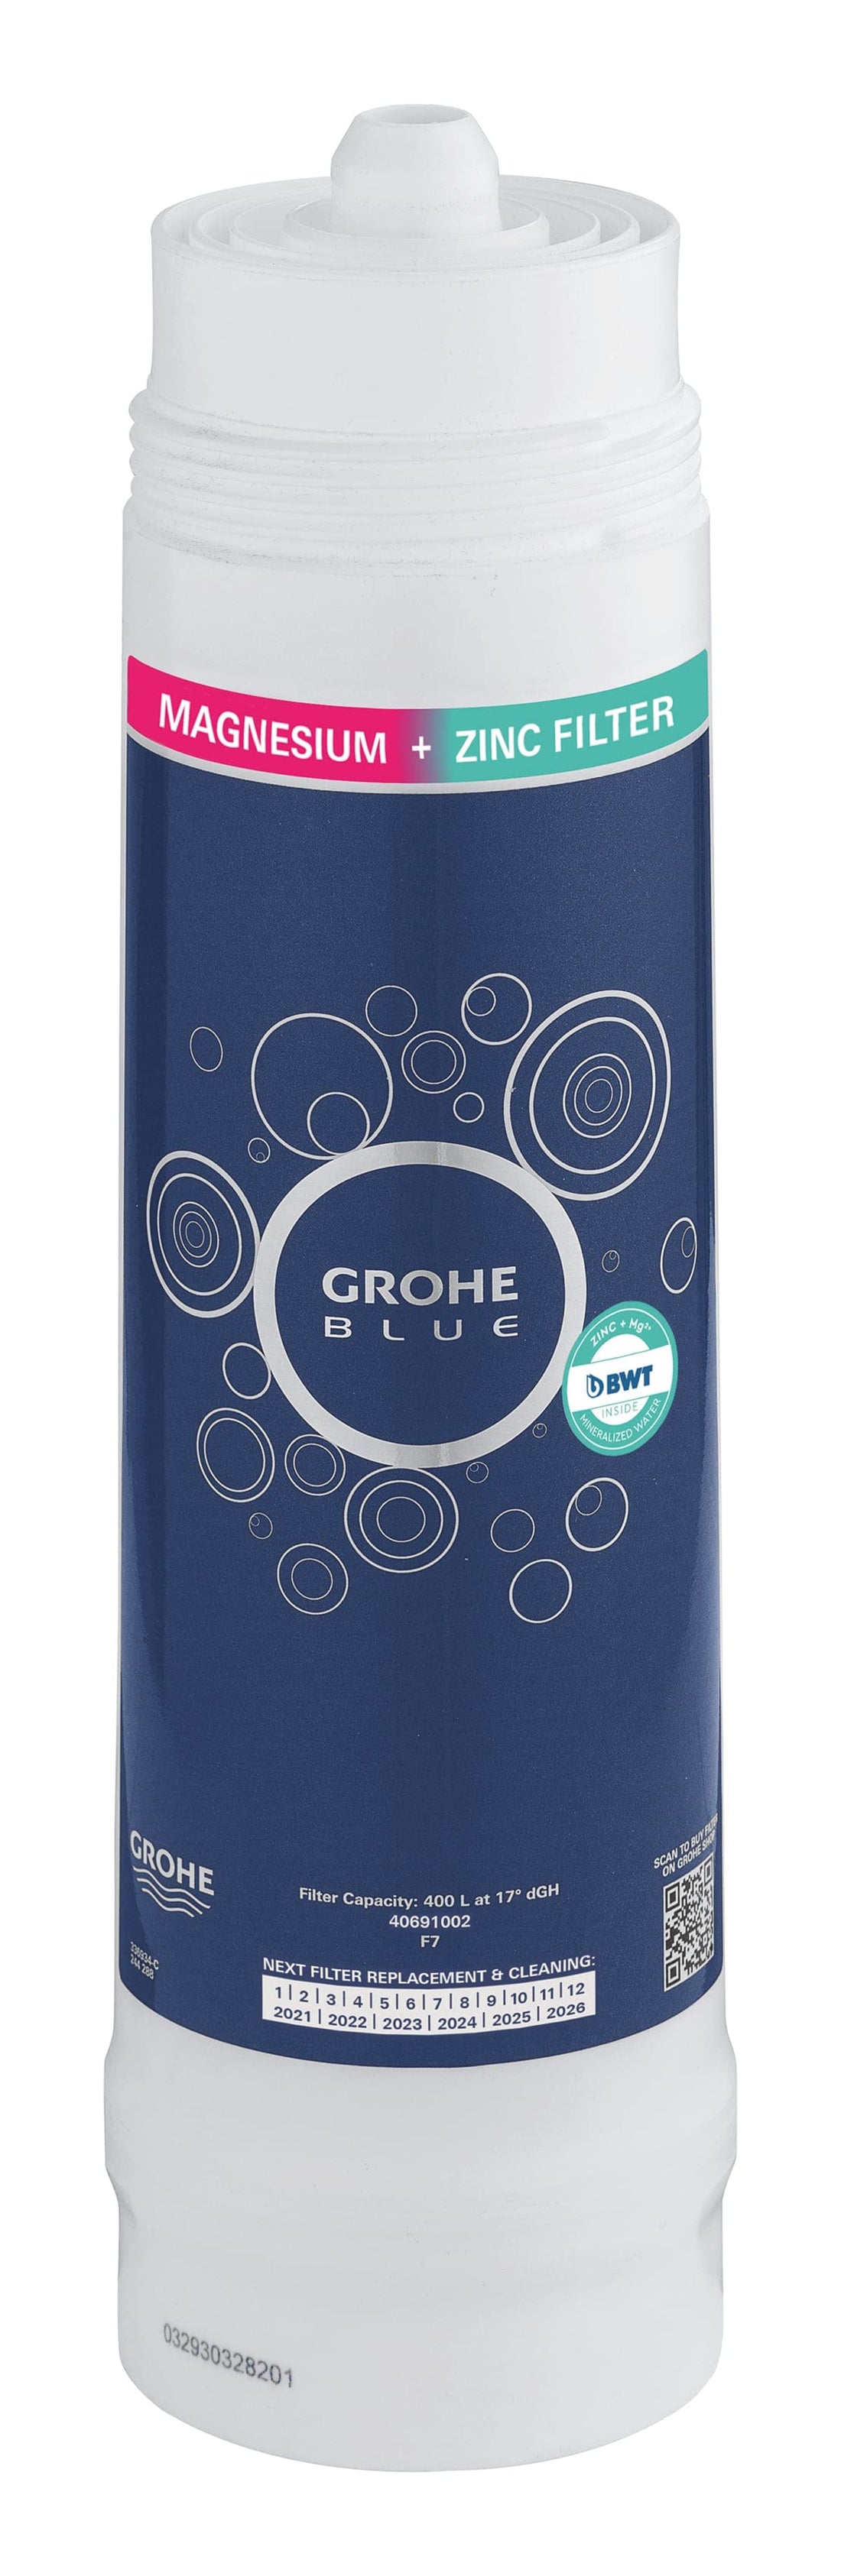 GROHE BLUE 5-STAGE FILTER 600L MAGNESIUM+ZINC - best price from Maltashopper.com BR430009935